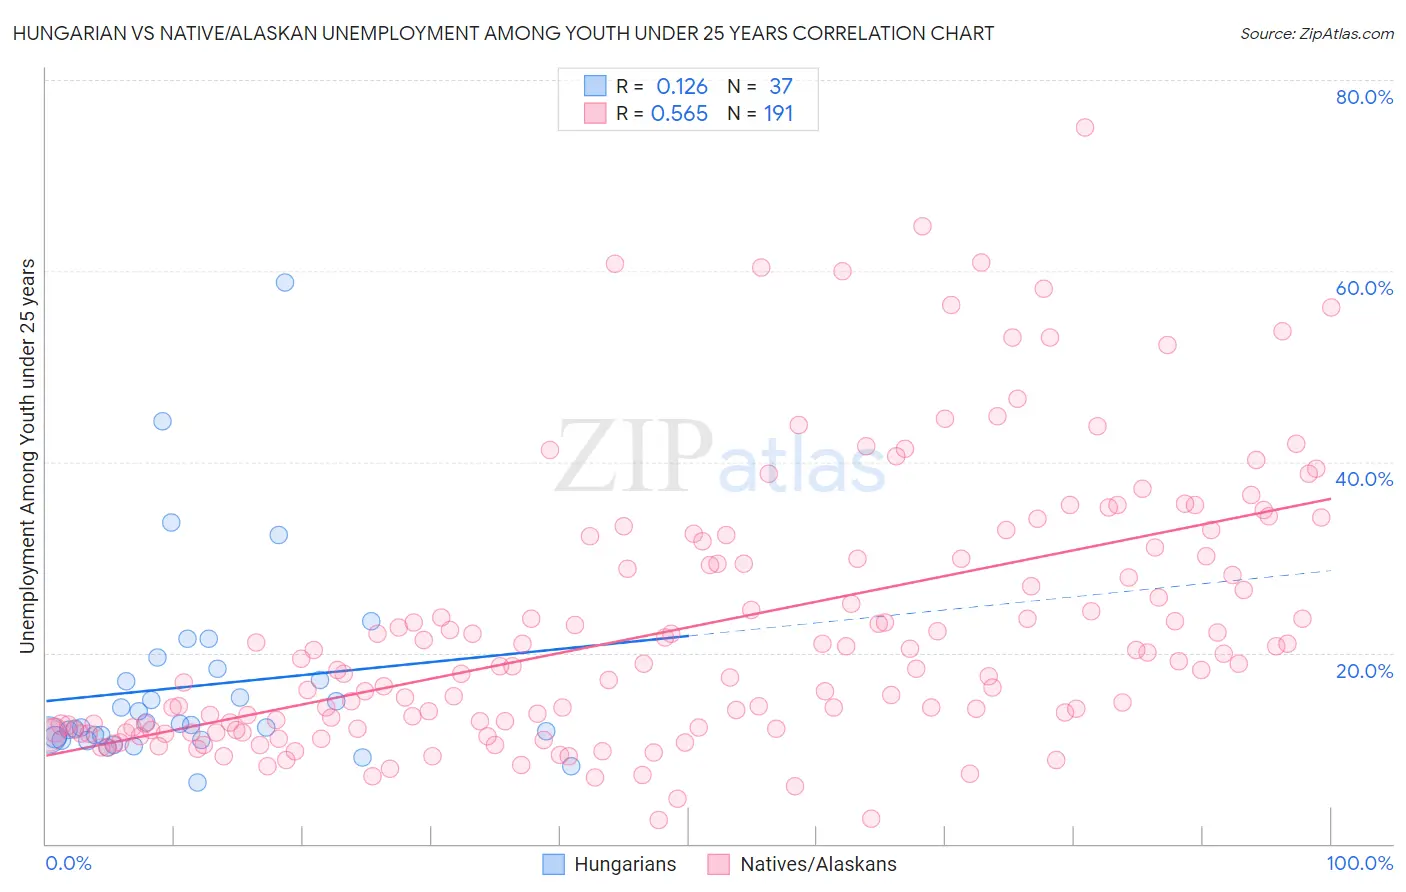 Hungarian vs Native/Alaskan Unemployment Among Youth under 25 years